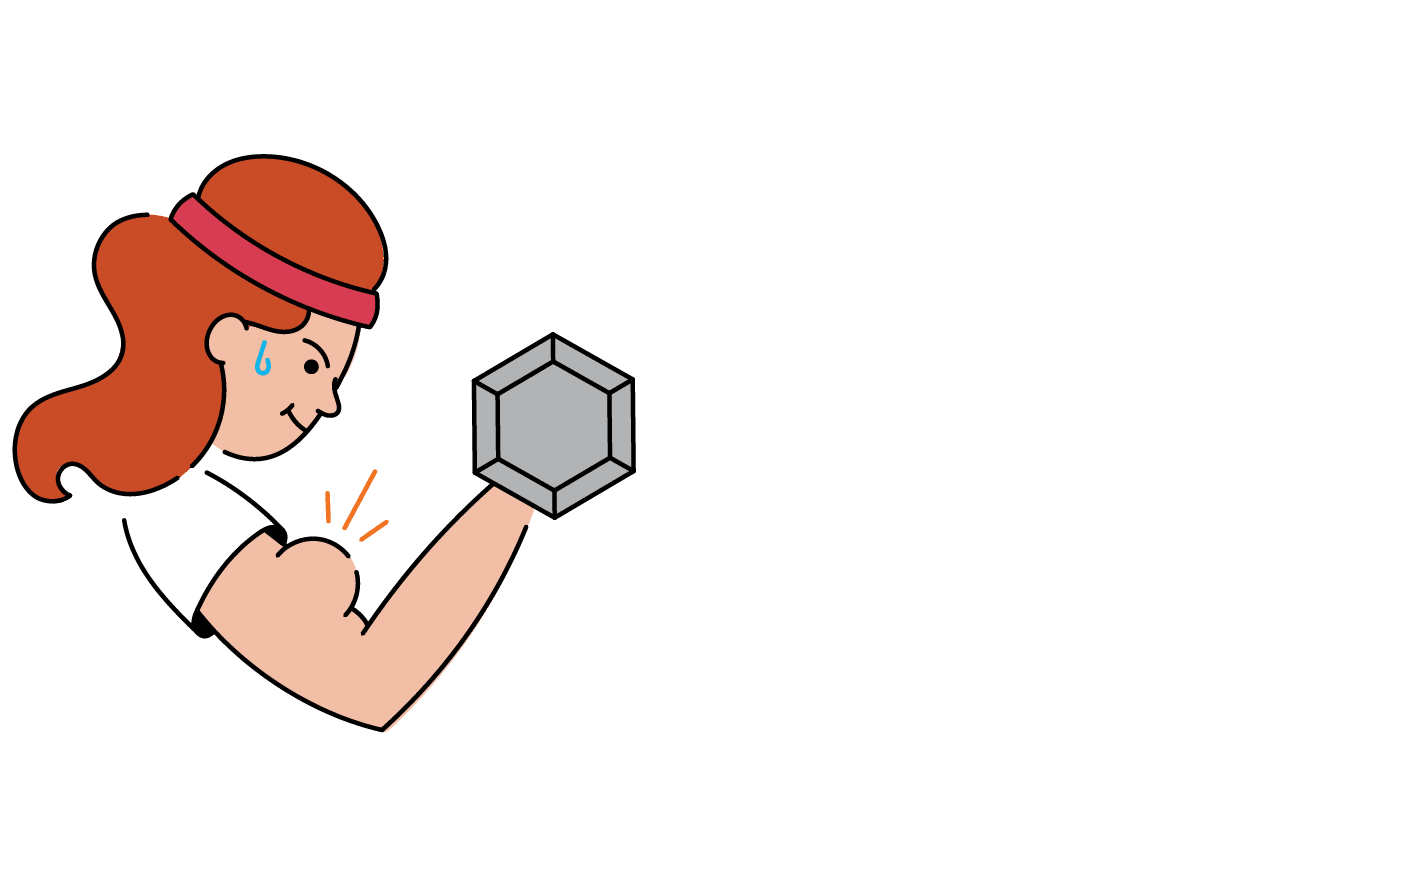 A cartoon image of a woman with red hair, wearing a cap, flexing her arm muscles and holding a grey dumbbell, against a green background.